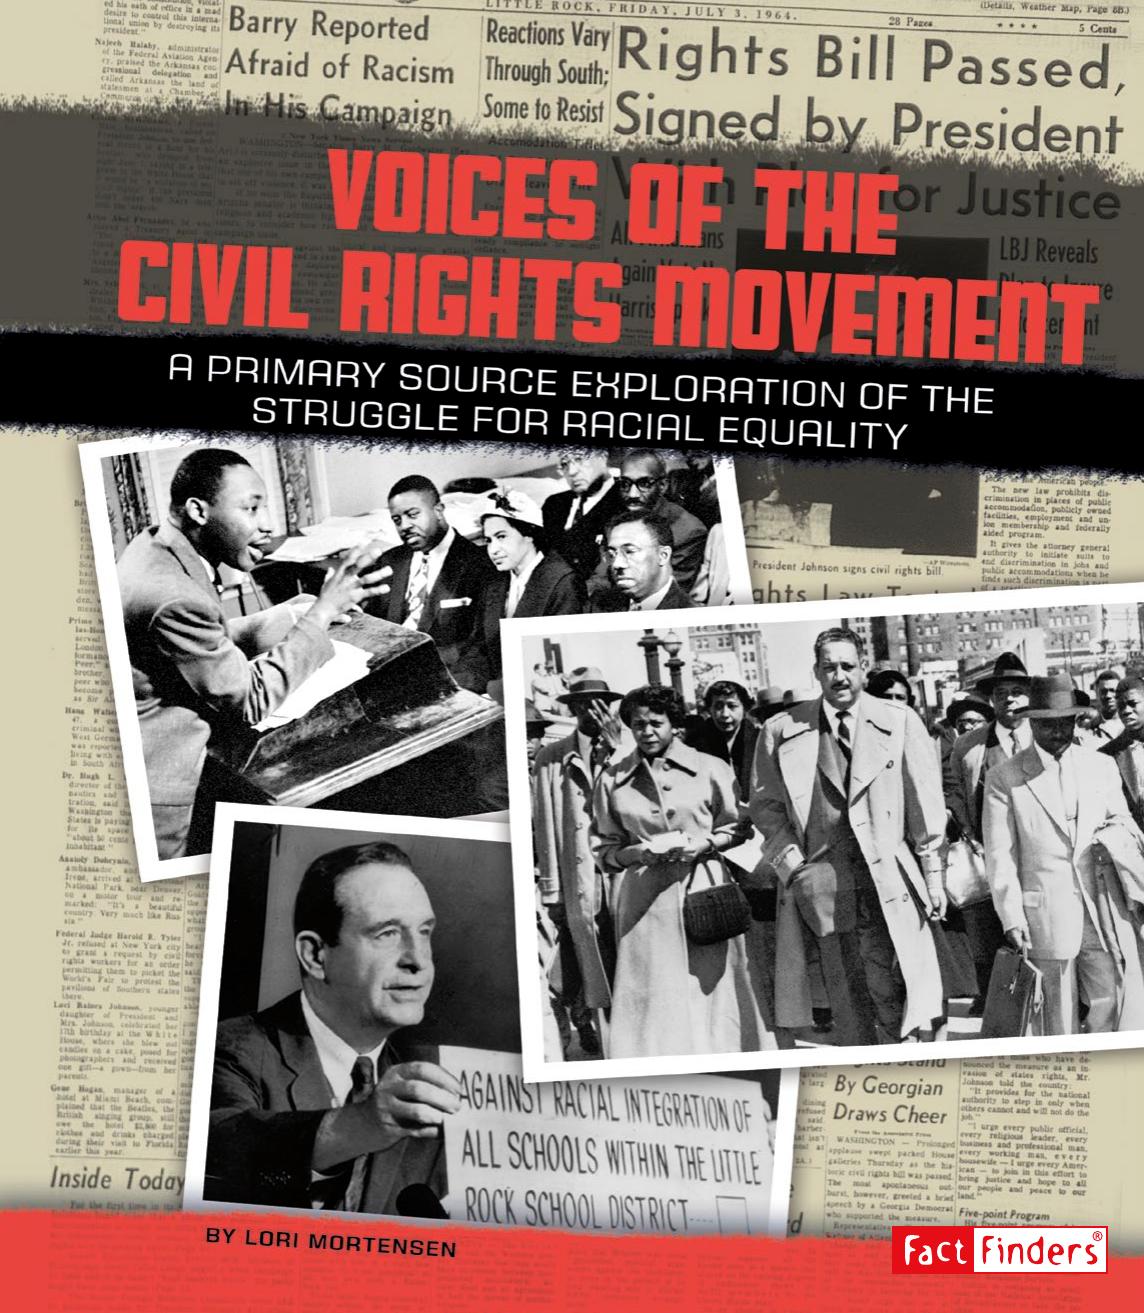 Voices of the Civil Rights Movement: A Primary Source Exploration of the Struggle for Racial Equality (We Shall Overcome) by Lori Mortensen